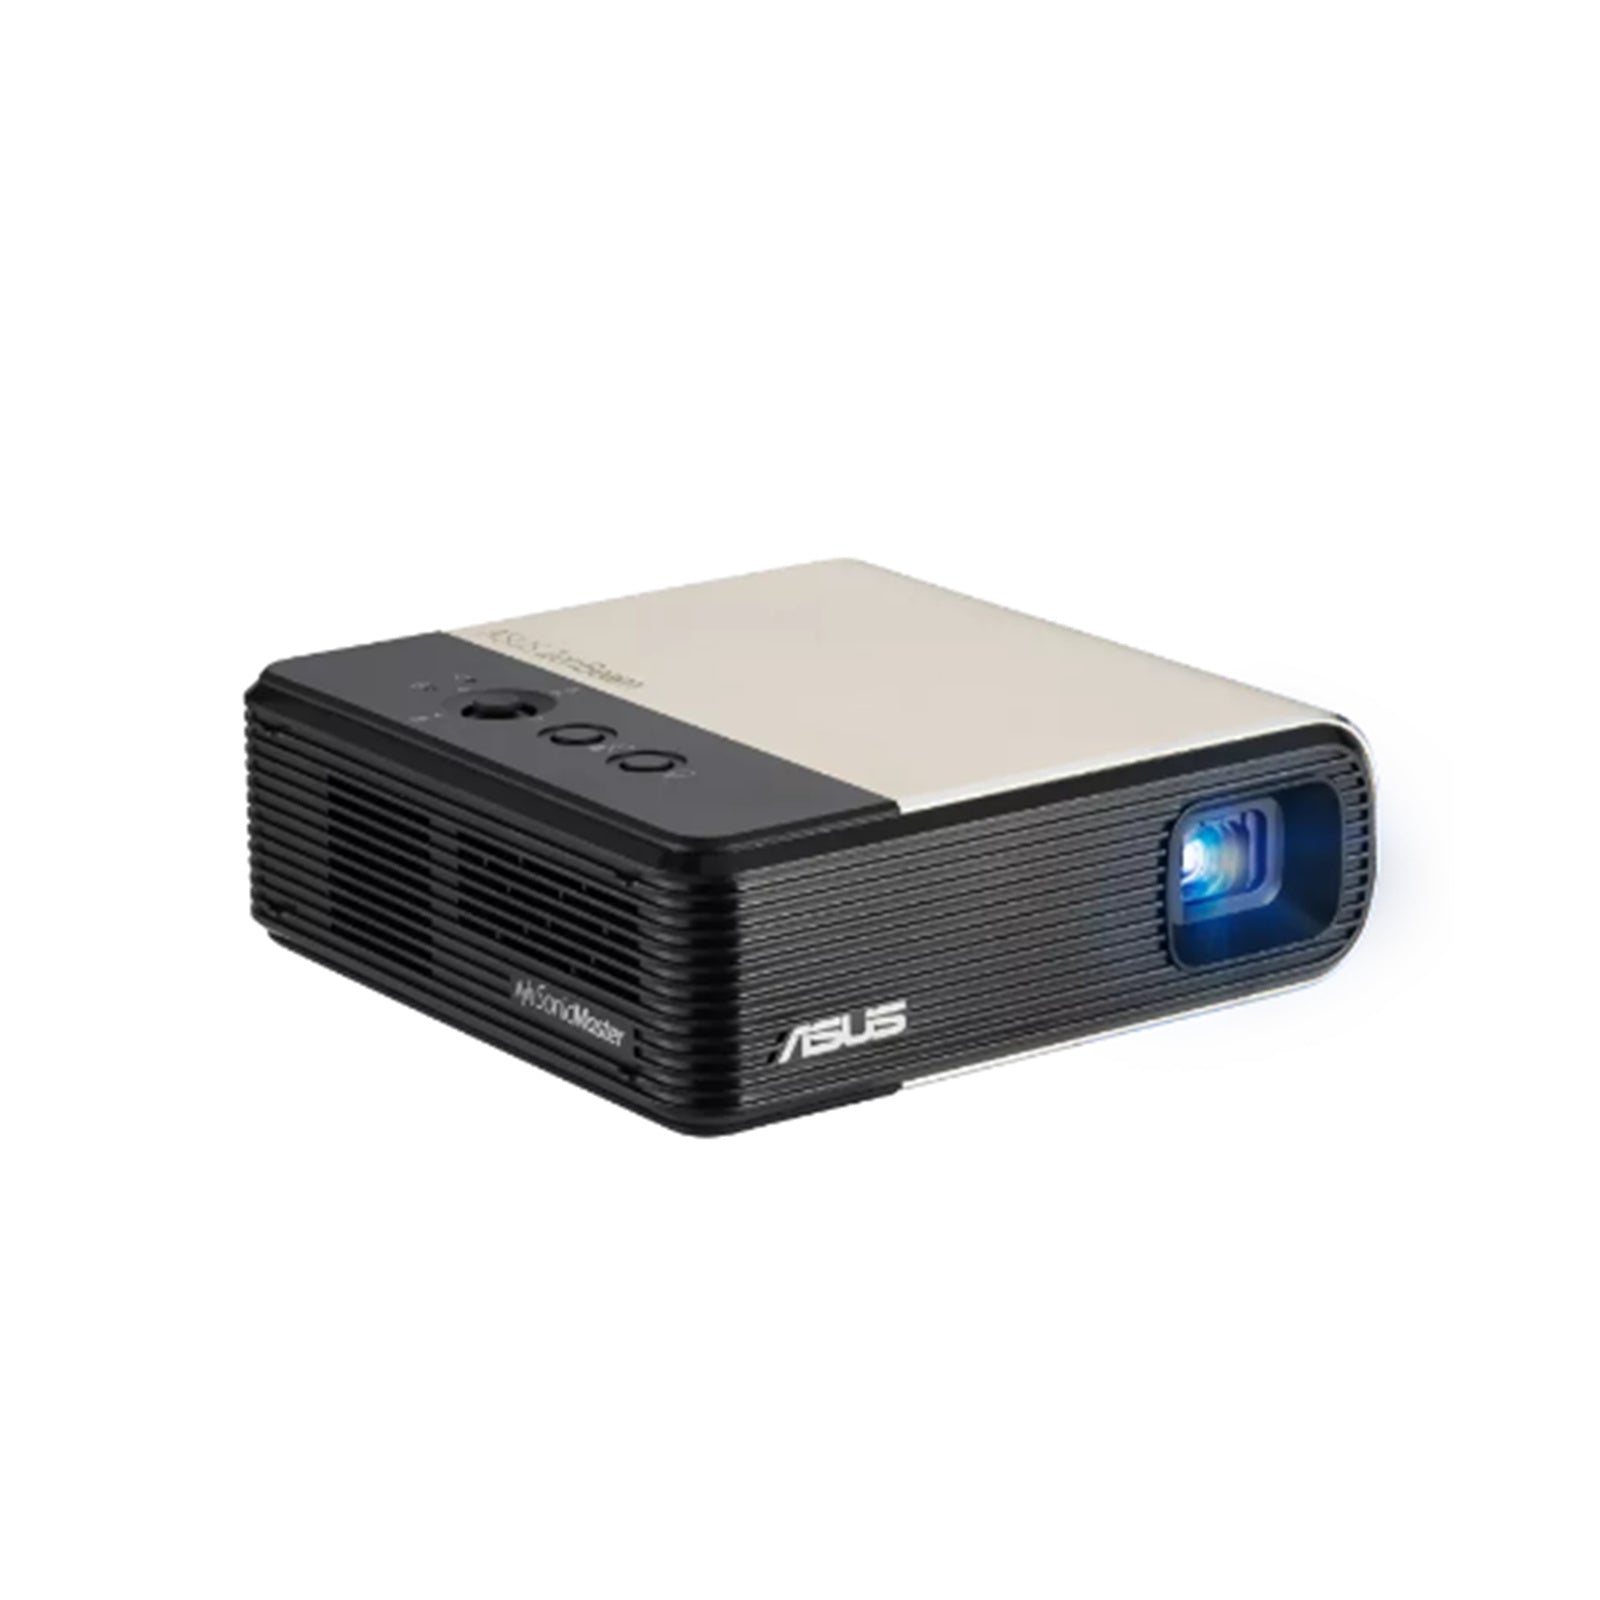 ASUS E2 PROJECTOR LED, 854x480, 300LM, 22wH, HDMI, USB-A, SPKR, WIFI, BT, 3YR